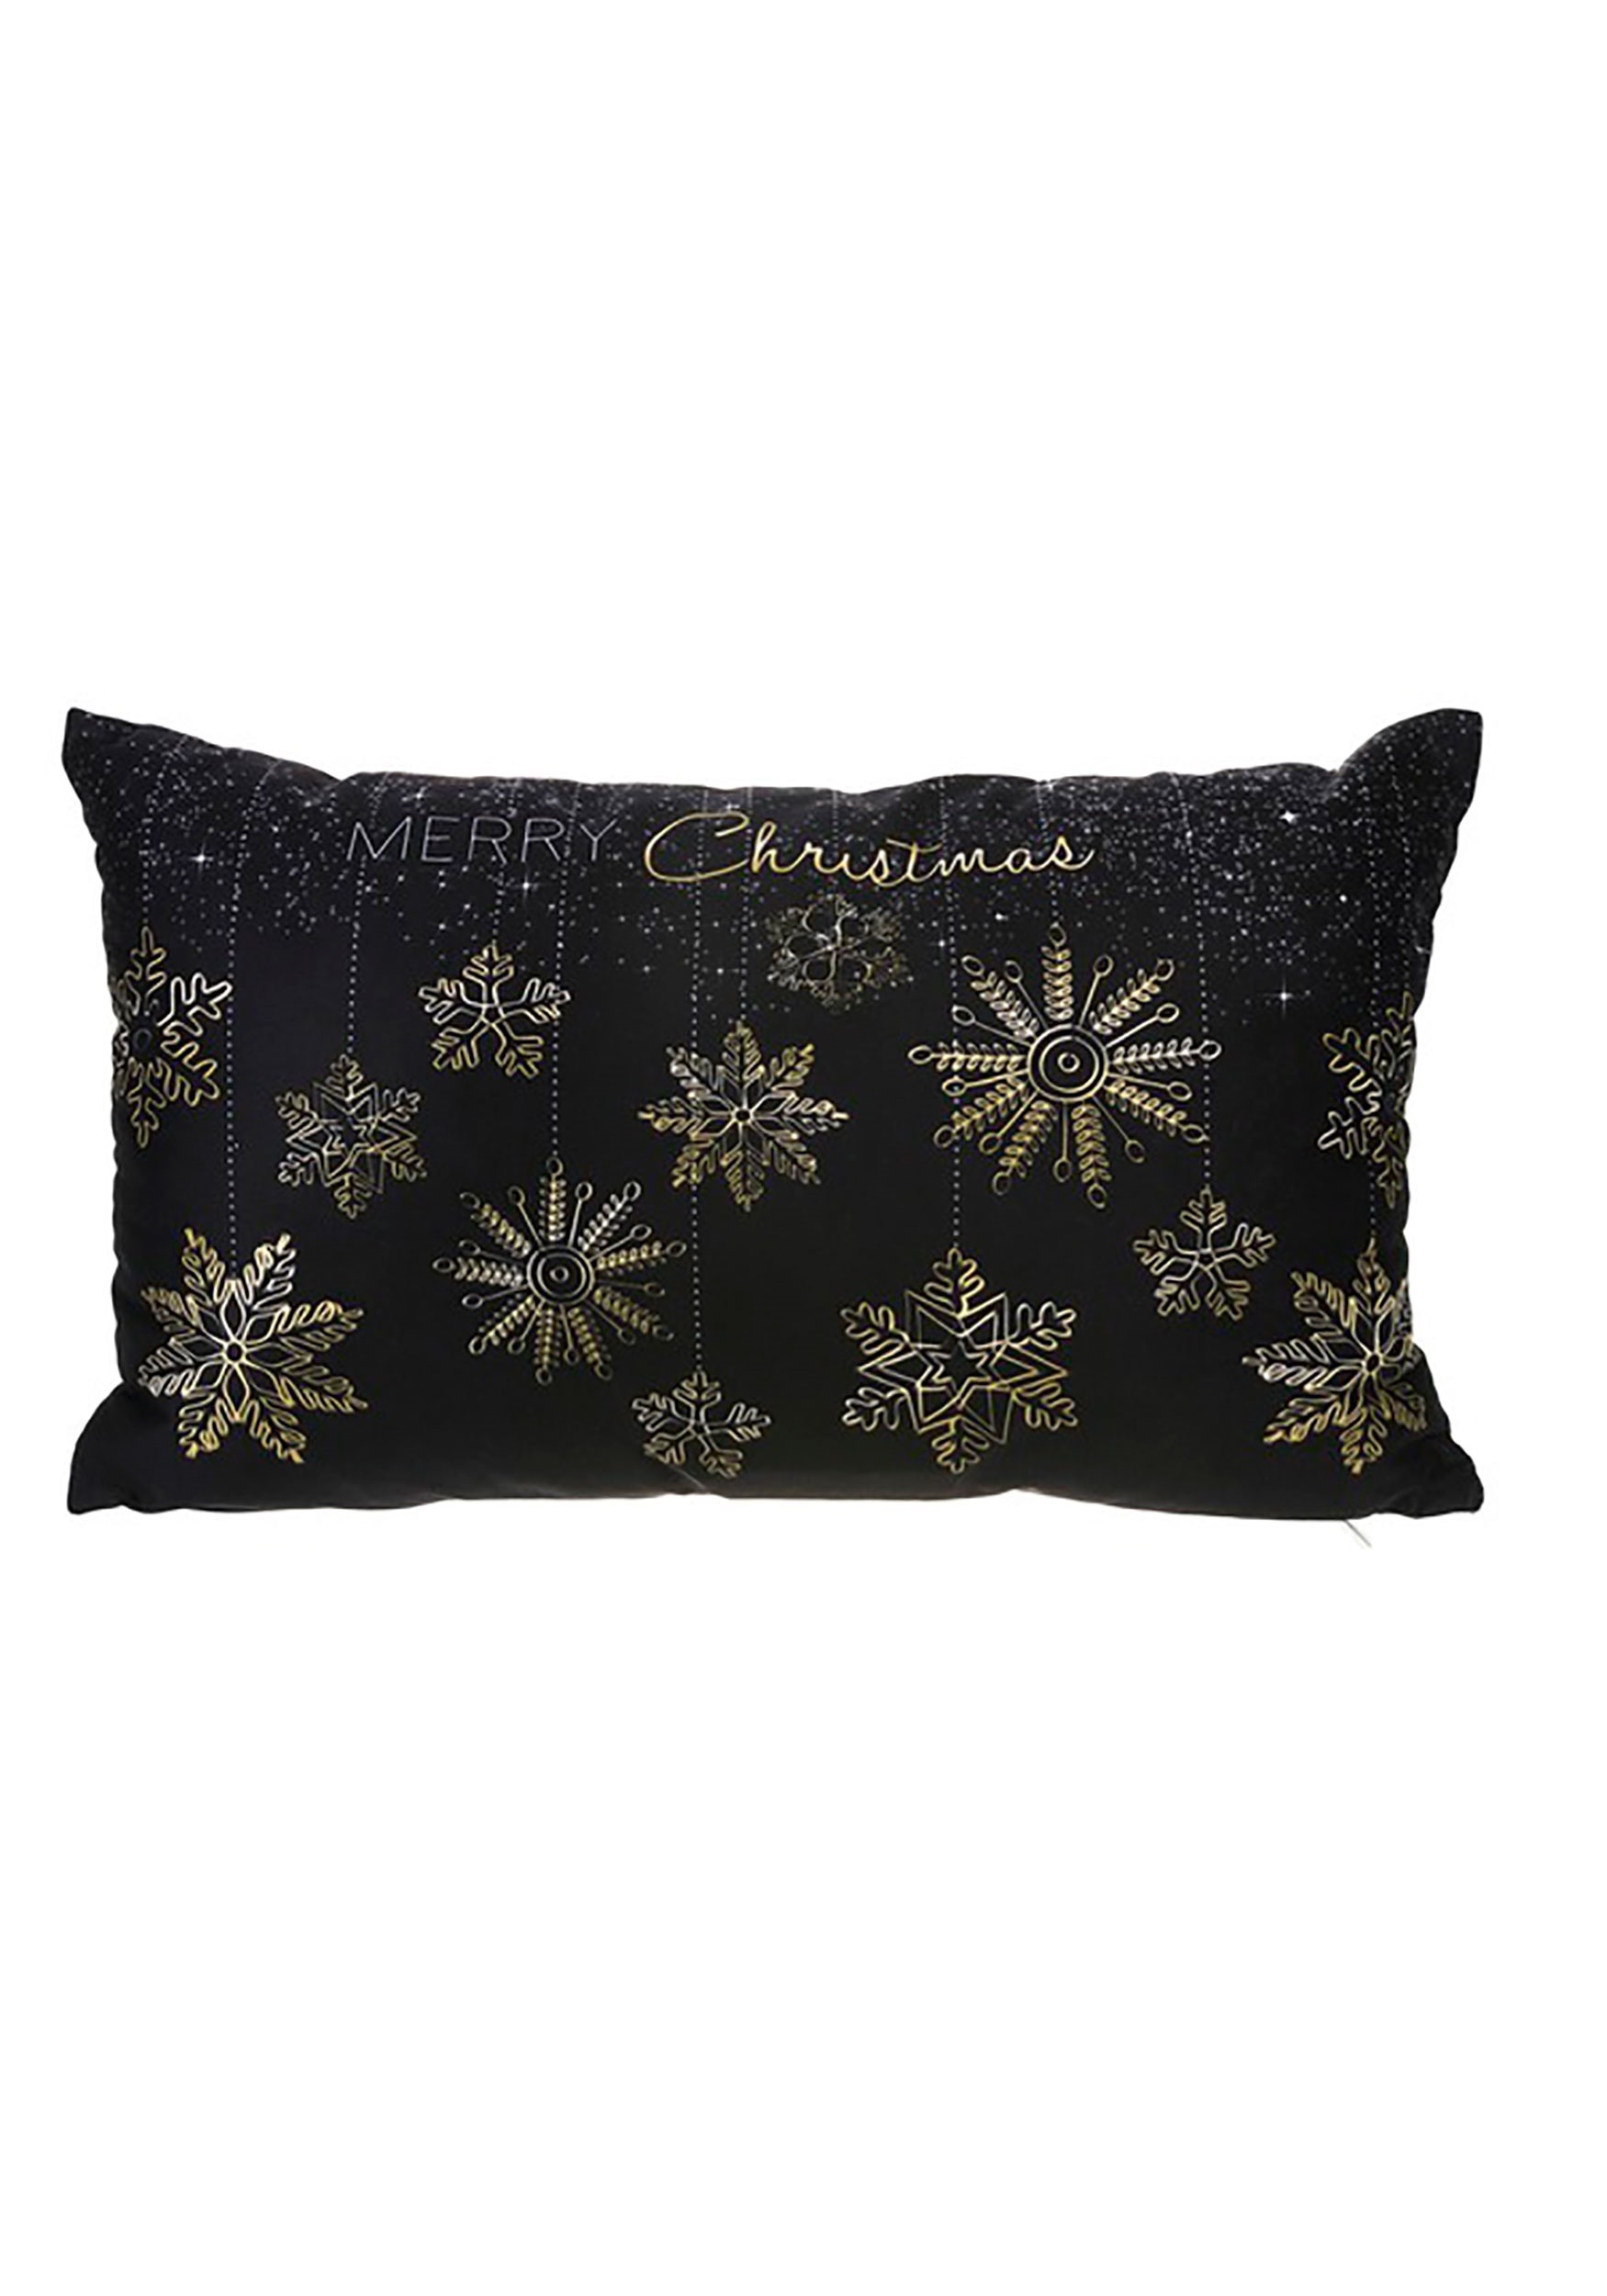 Merry Christmas Golden Snowflakes 19" x 12" Pillow w/LED Lights